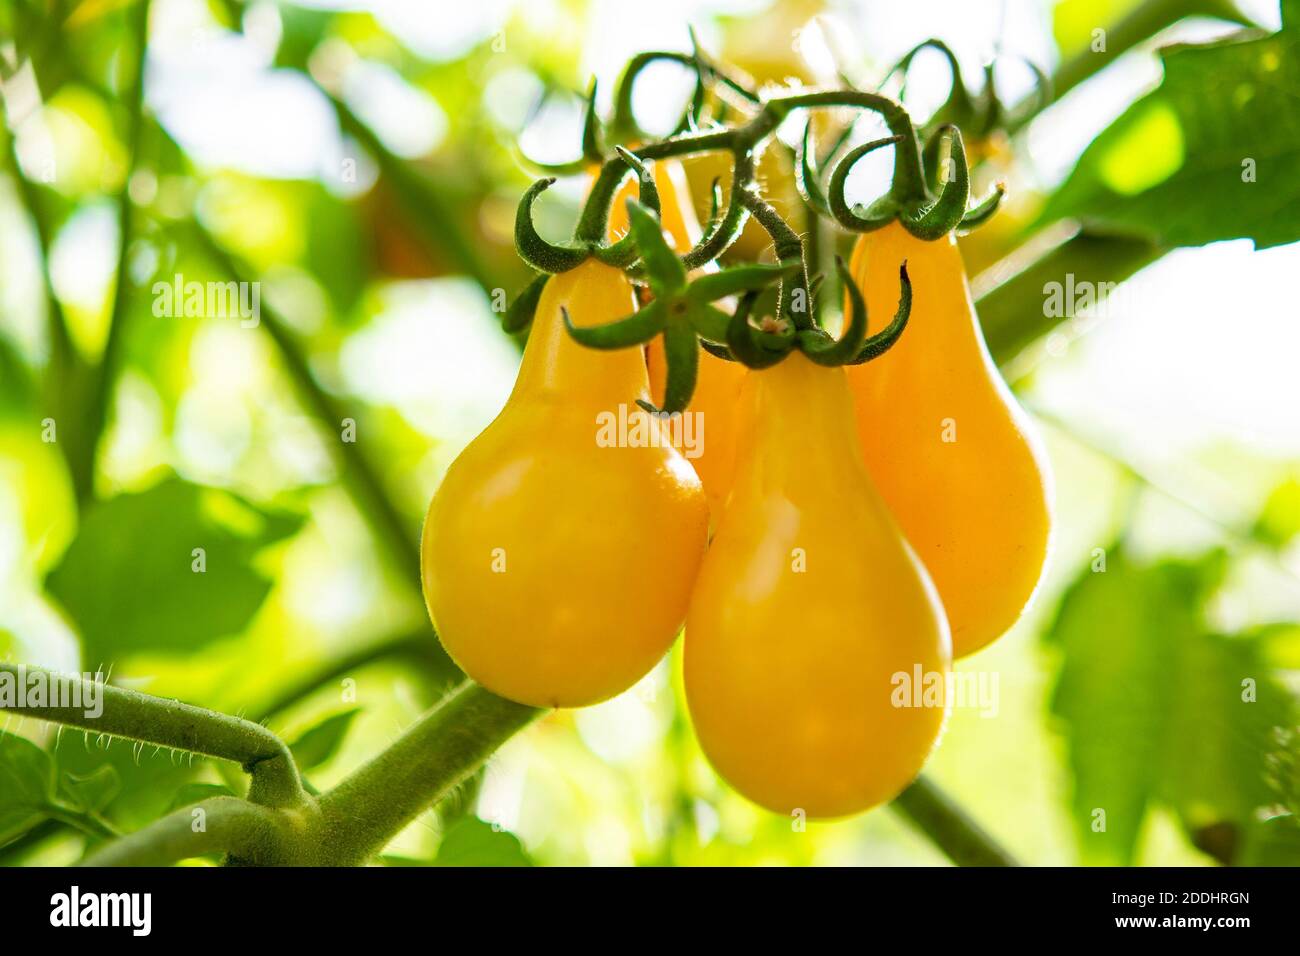 A bunch of ripe yellow pear-shaped tomatoes hanging from a branch Stock Photo